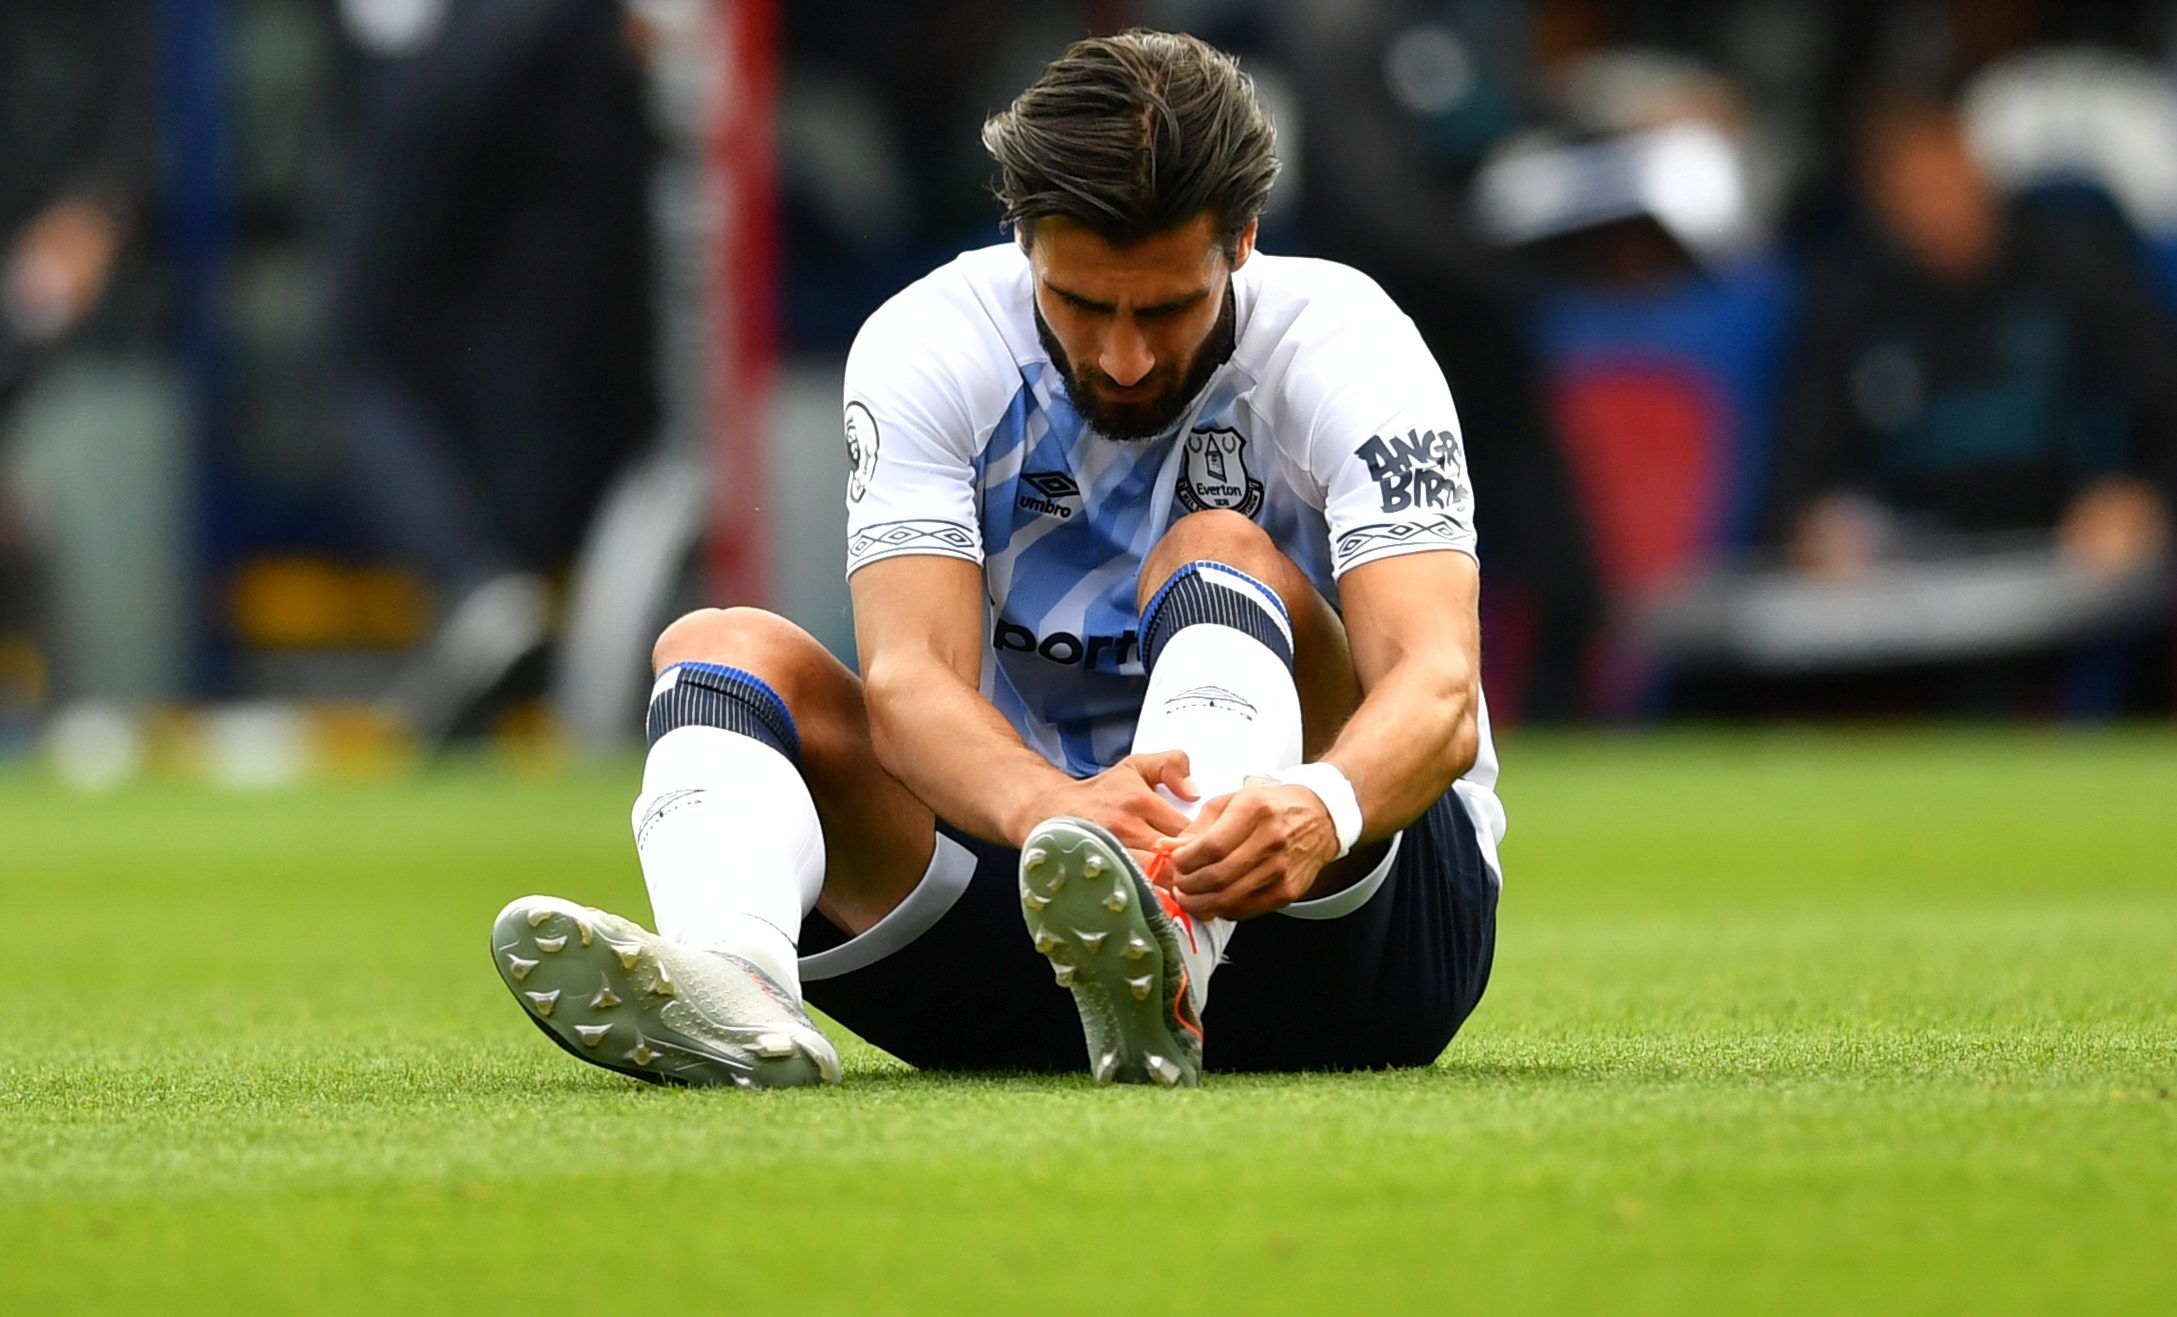 Soccer Football - Premier League - Crystal Palace v Everton - Selhurst Park, London, Britain - August 10, 2019  Everton's Andre Gomes reacts after sustaining an injury  REUTERS/Dylan Martinez  EDITORIAL USE ONLY. No use with unauthorized audio, video, data, fixture lists, club/league logos or 